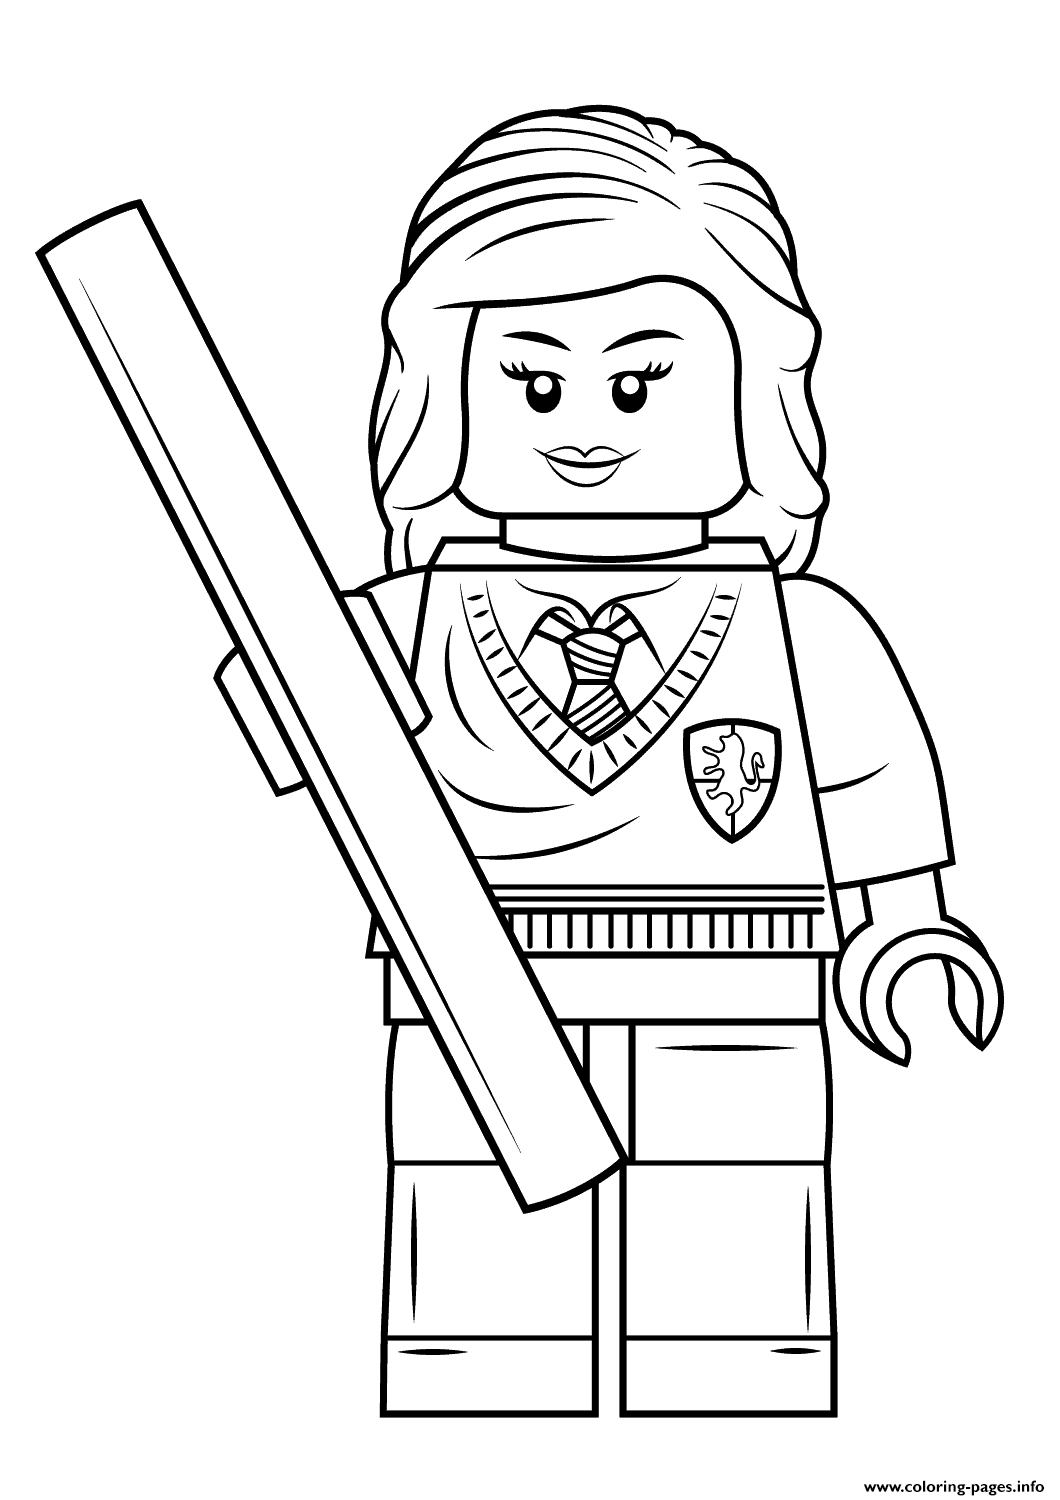 printable-harry-potter-lego-coloring-page-topcoloringpages